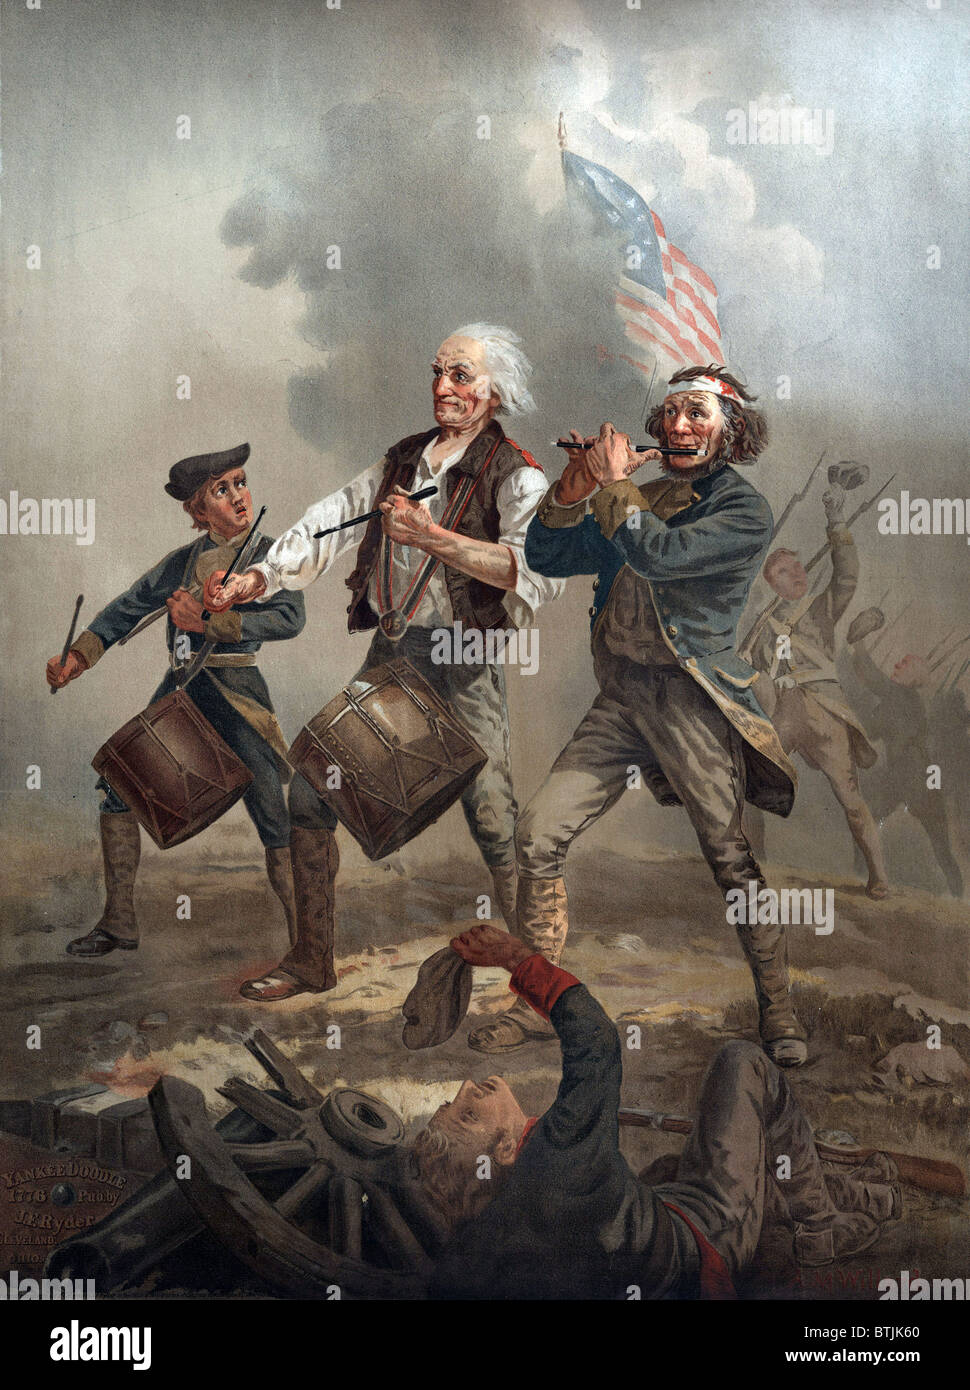 The American Revolution, Yankee Doodle 1776, three patriots, two playing drums and one playing a fife leading troops into battle, by Archibald M. Willard, circa 1876. Stock Photo